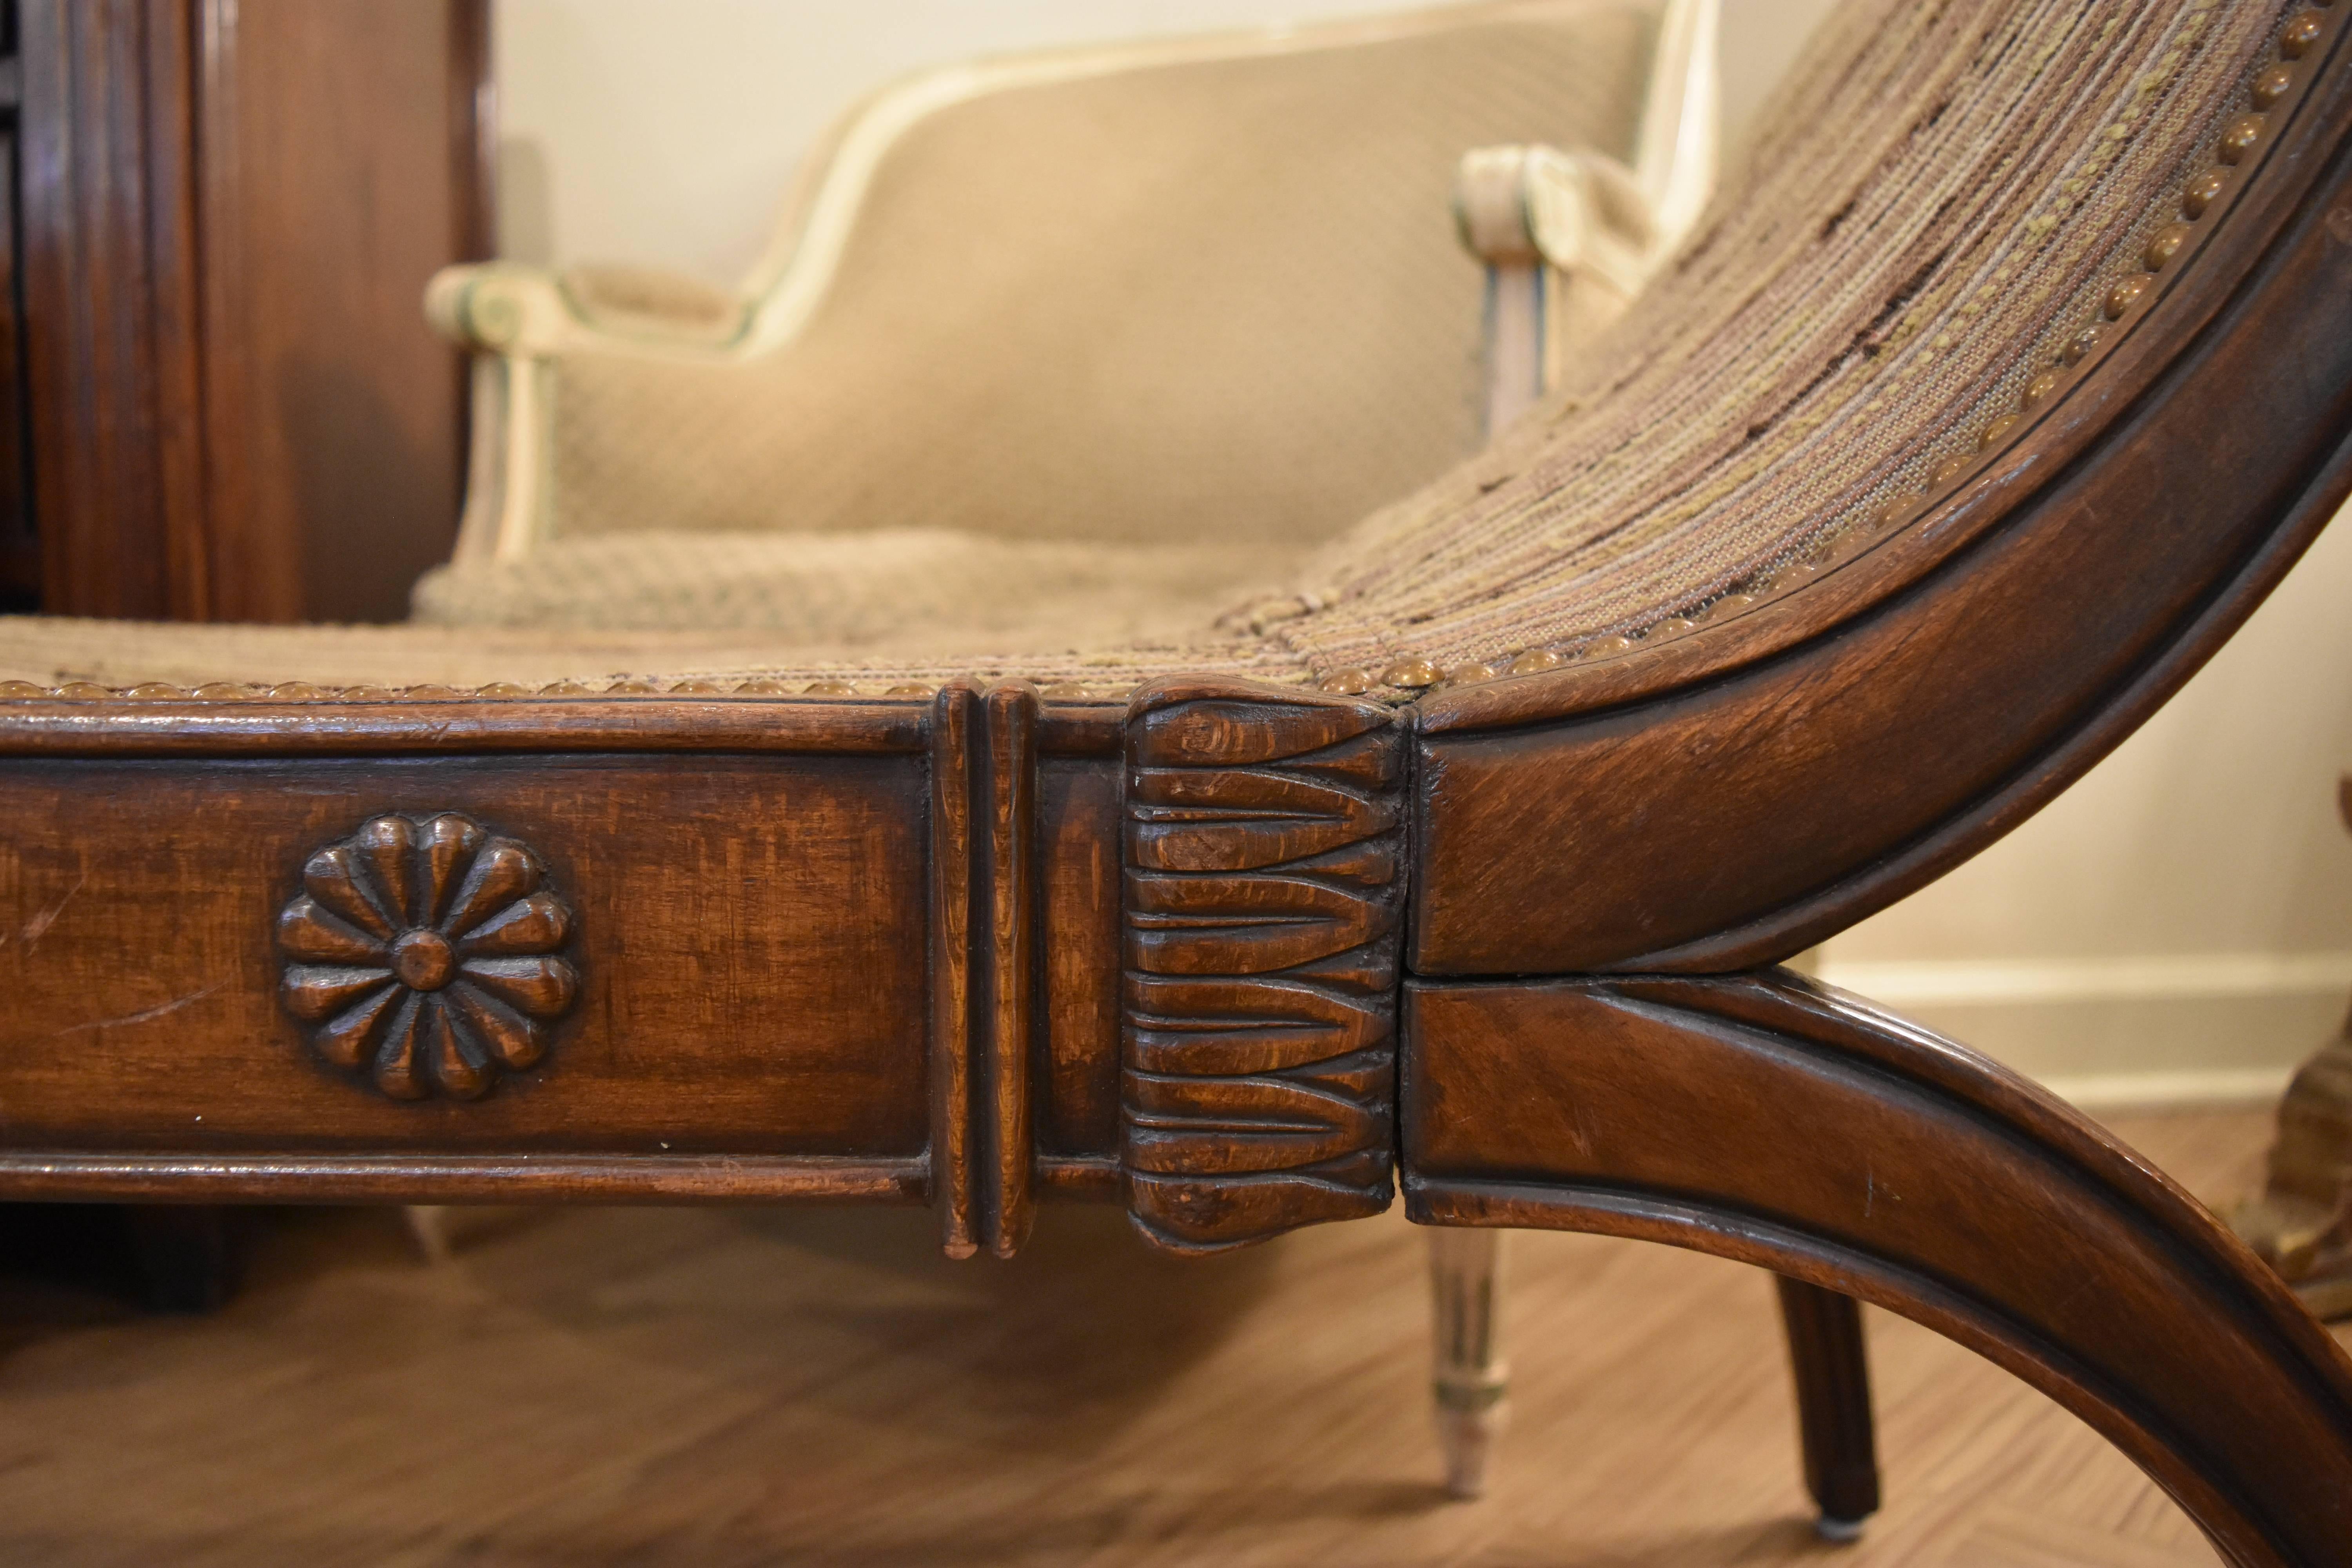 This hand-carved walnut French neoclassic or Empire style X-form bench features rolled arms and beautiful hand carvings.
It is substantial in size and would look fantastic with both traditional and transitional decor. The fabric is worn and needs